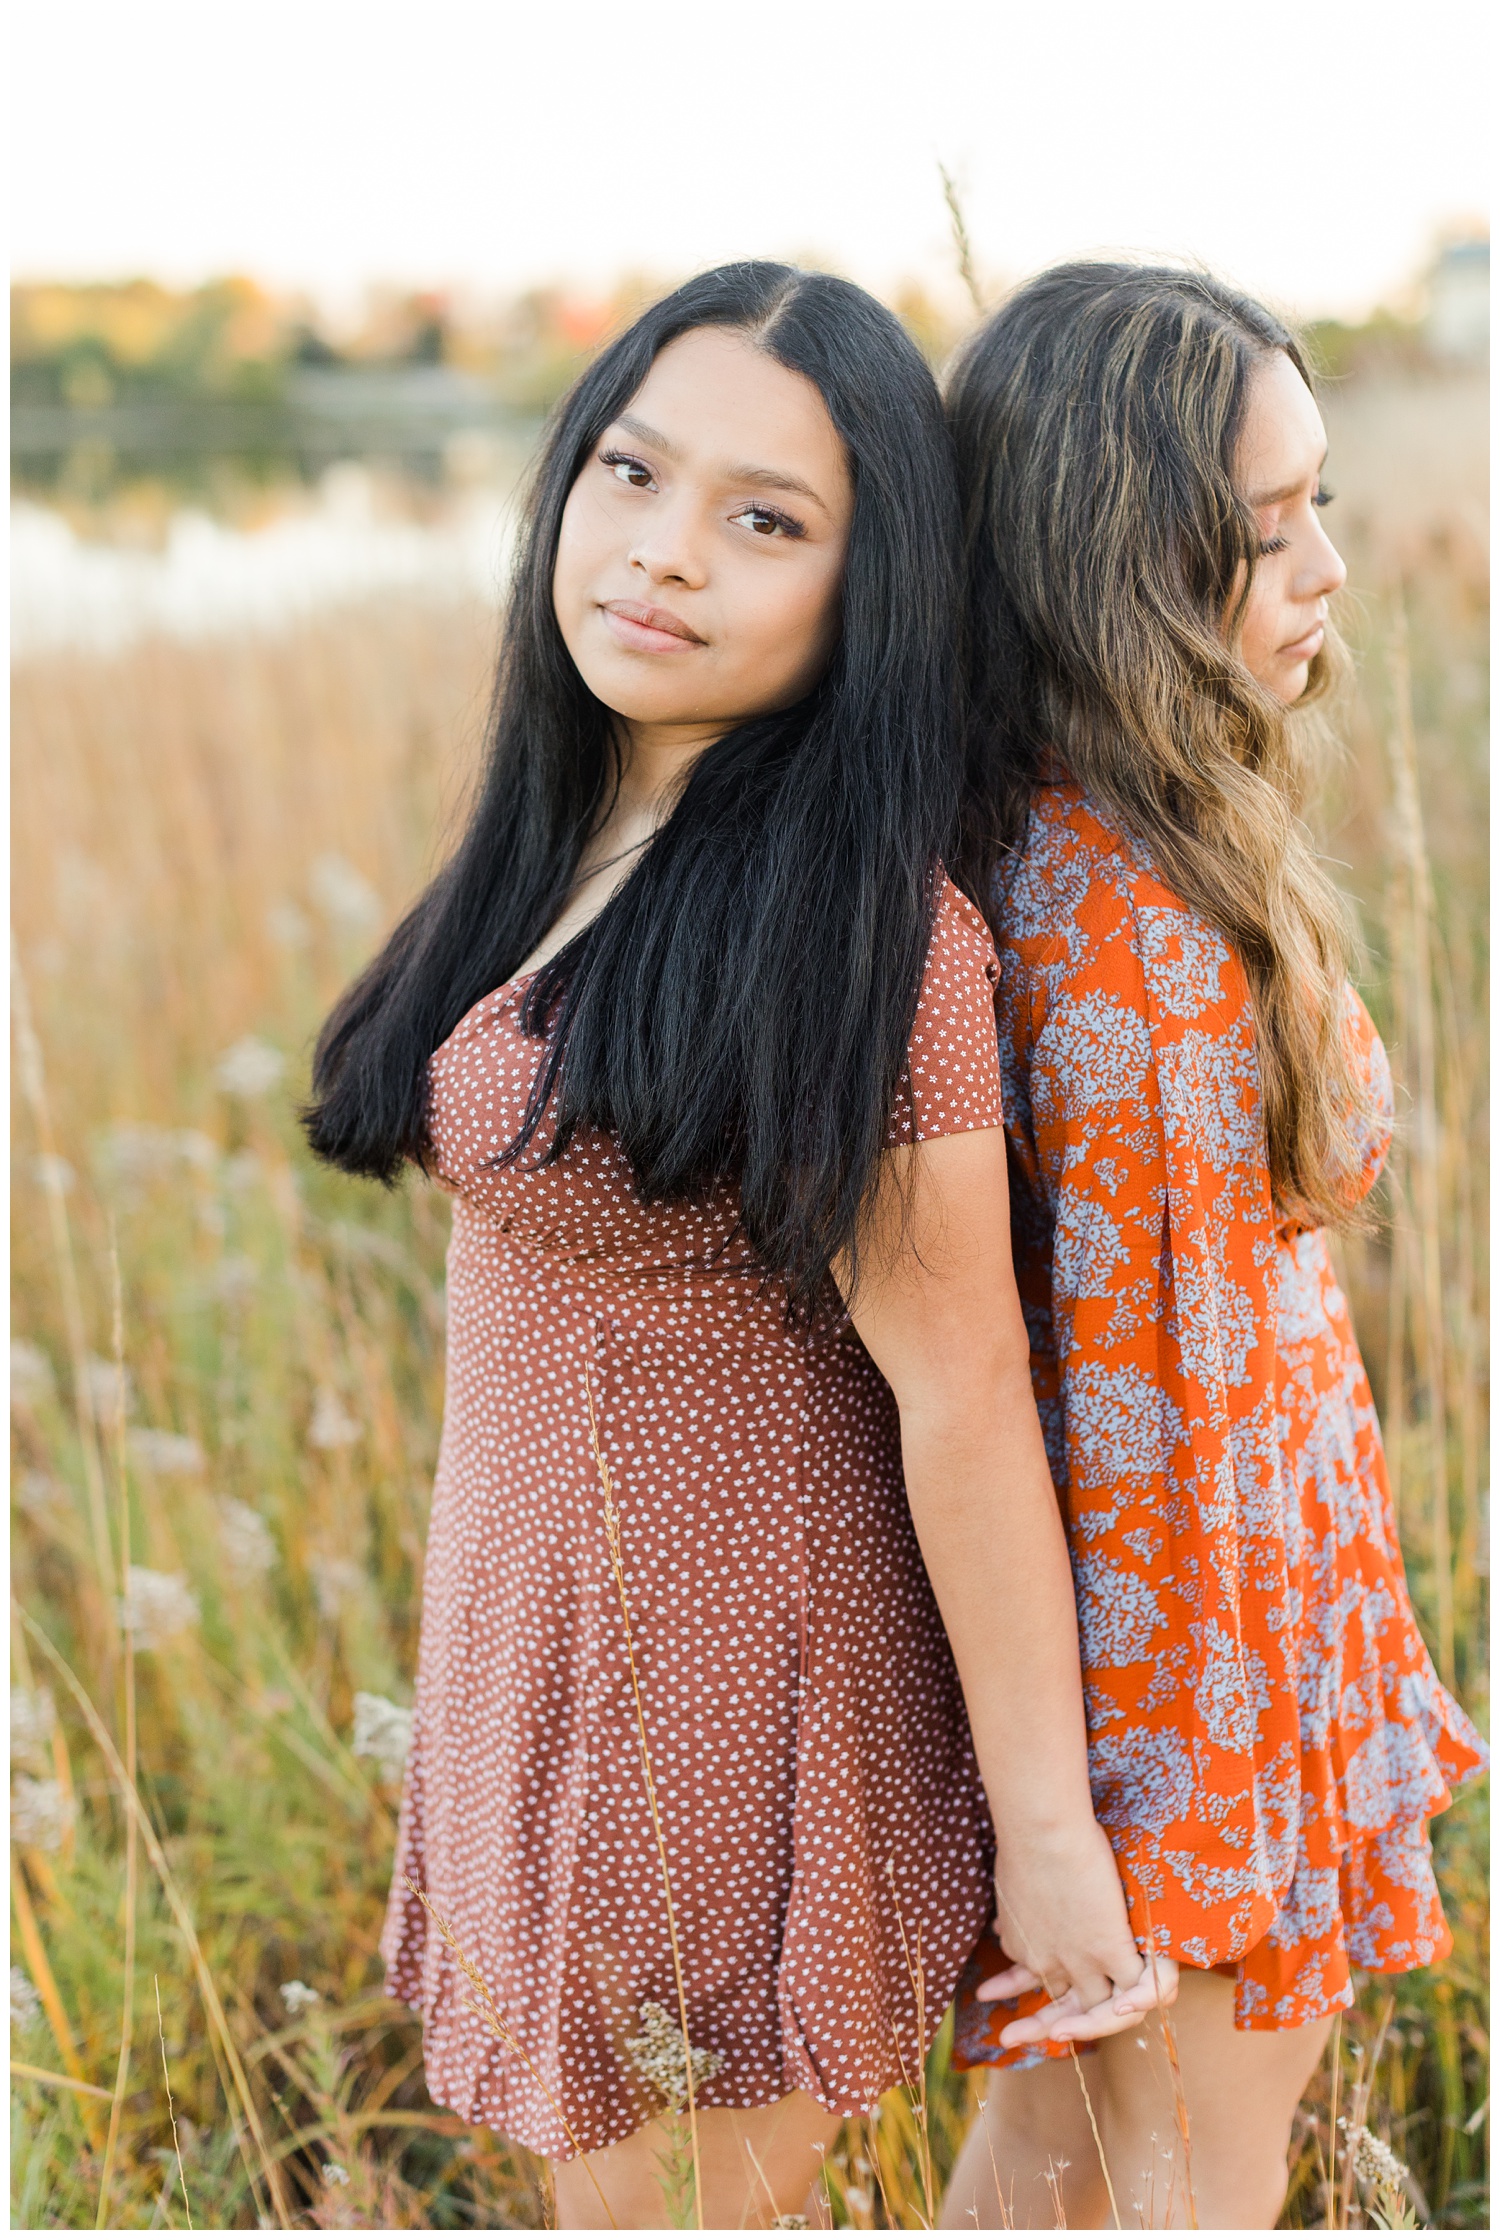 Twin sisters, Nicte and Sasil, lean against each other's back in a grassy pasture during fall in Iowa | CB Studio